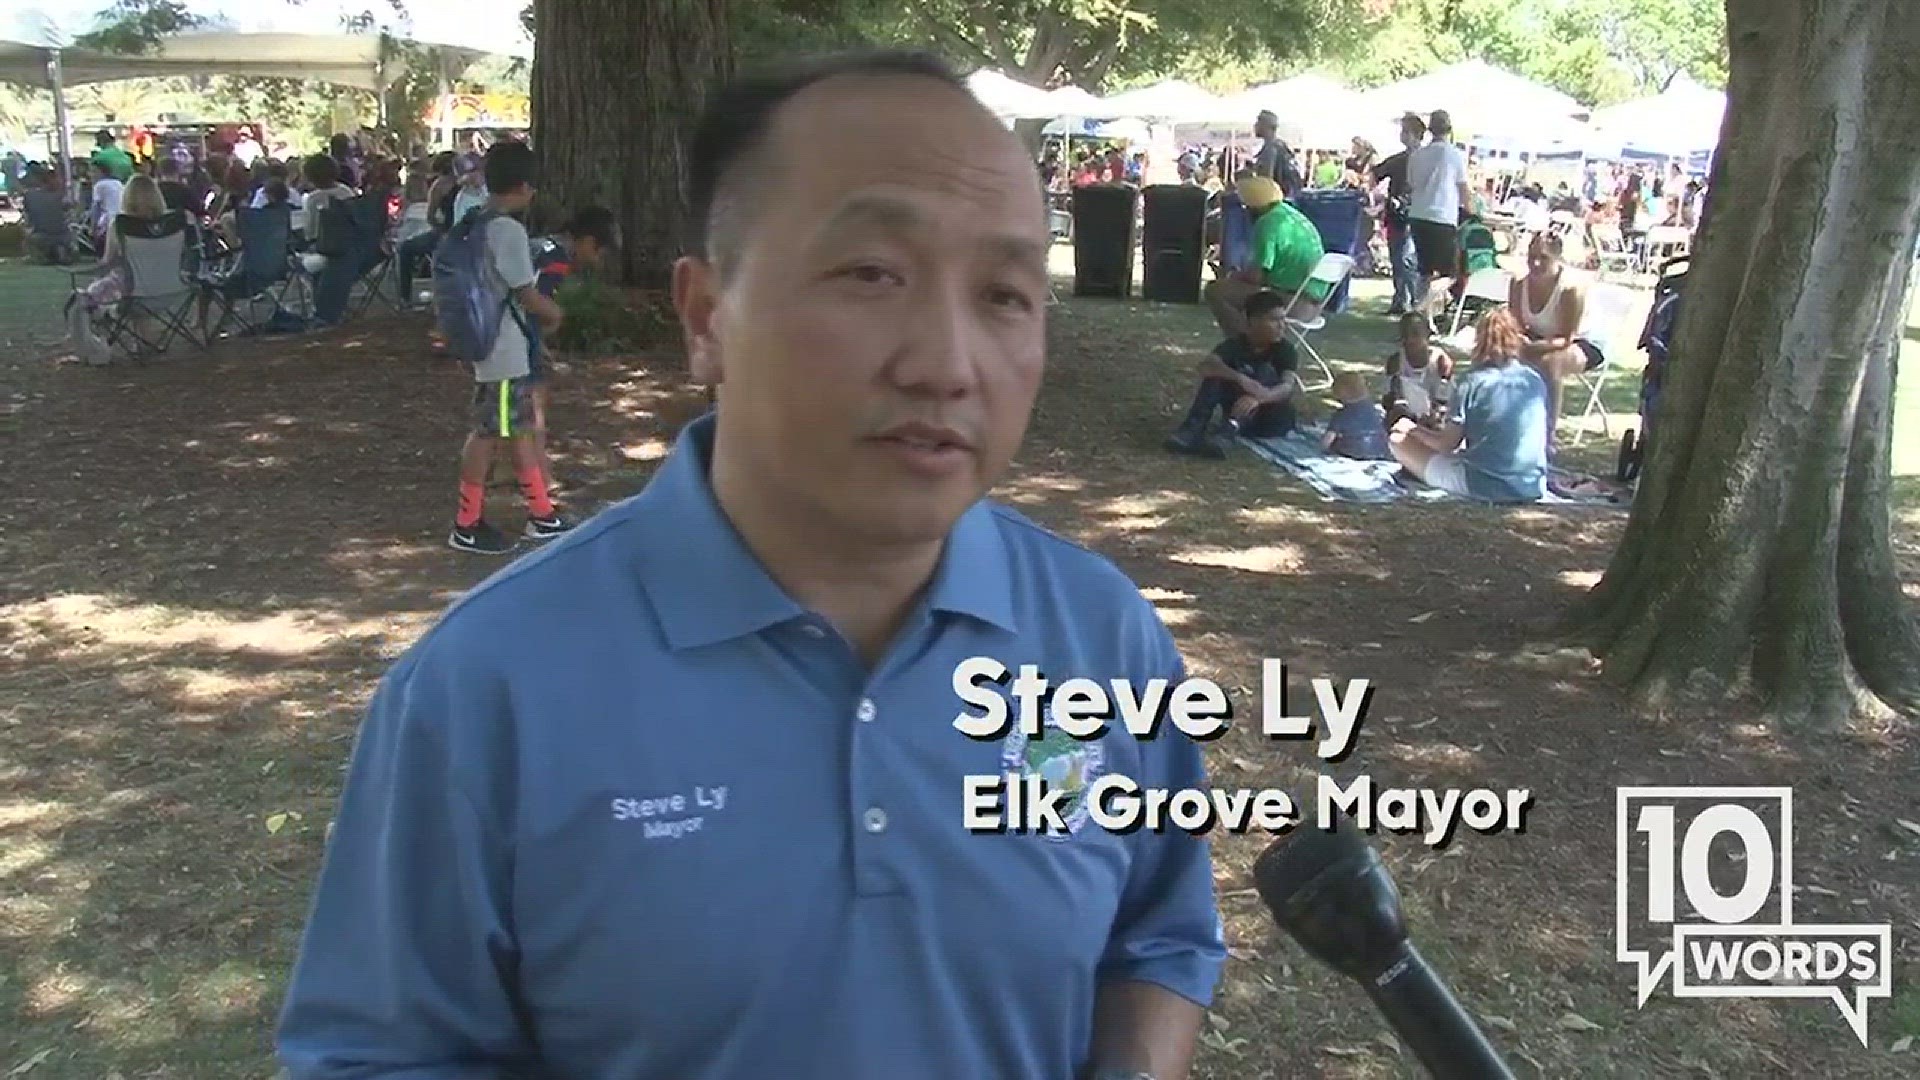 Elk Grove Mayor Steve Ly talks about balancing growth in the city.